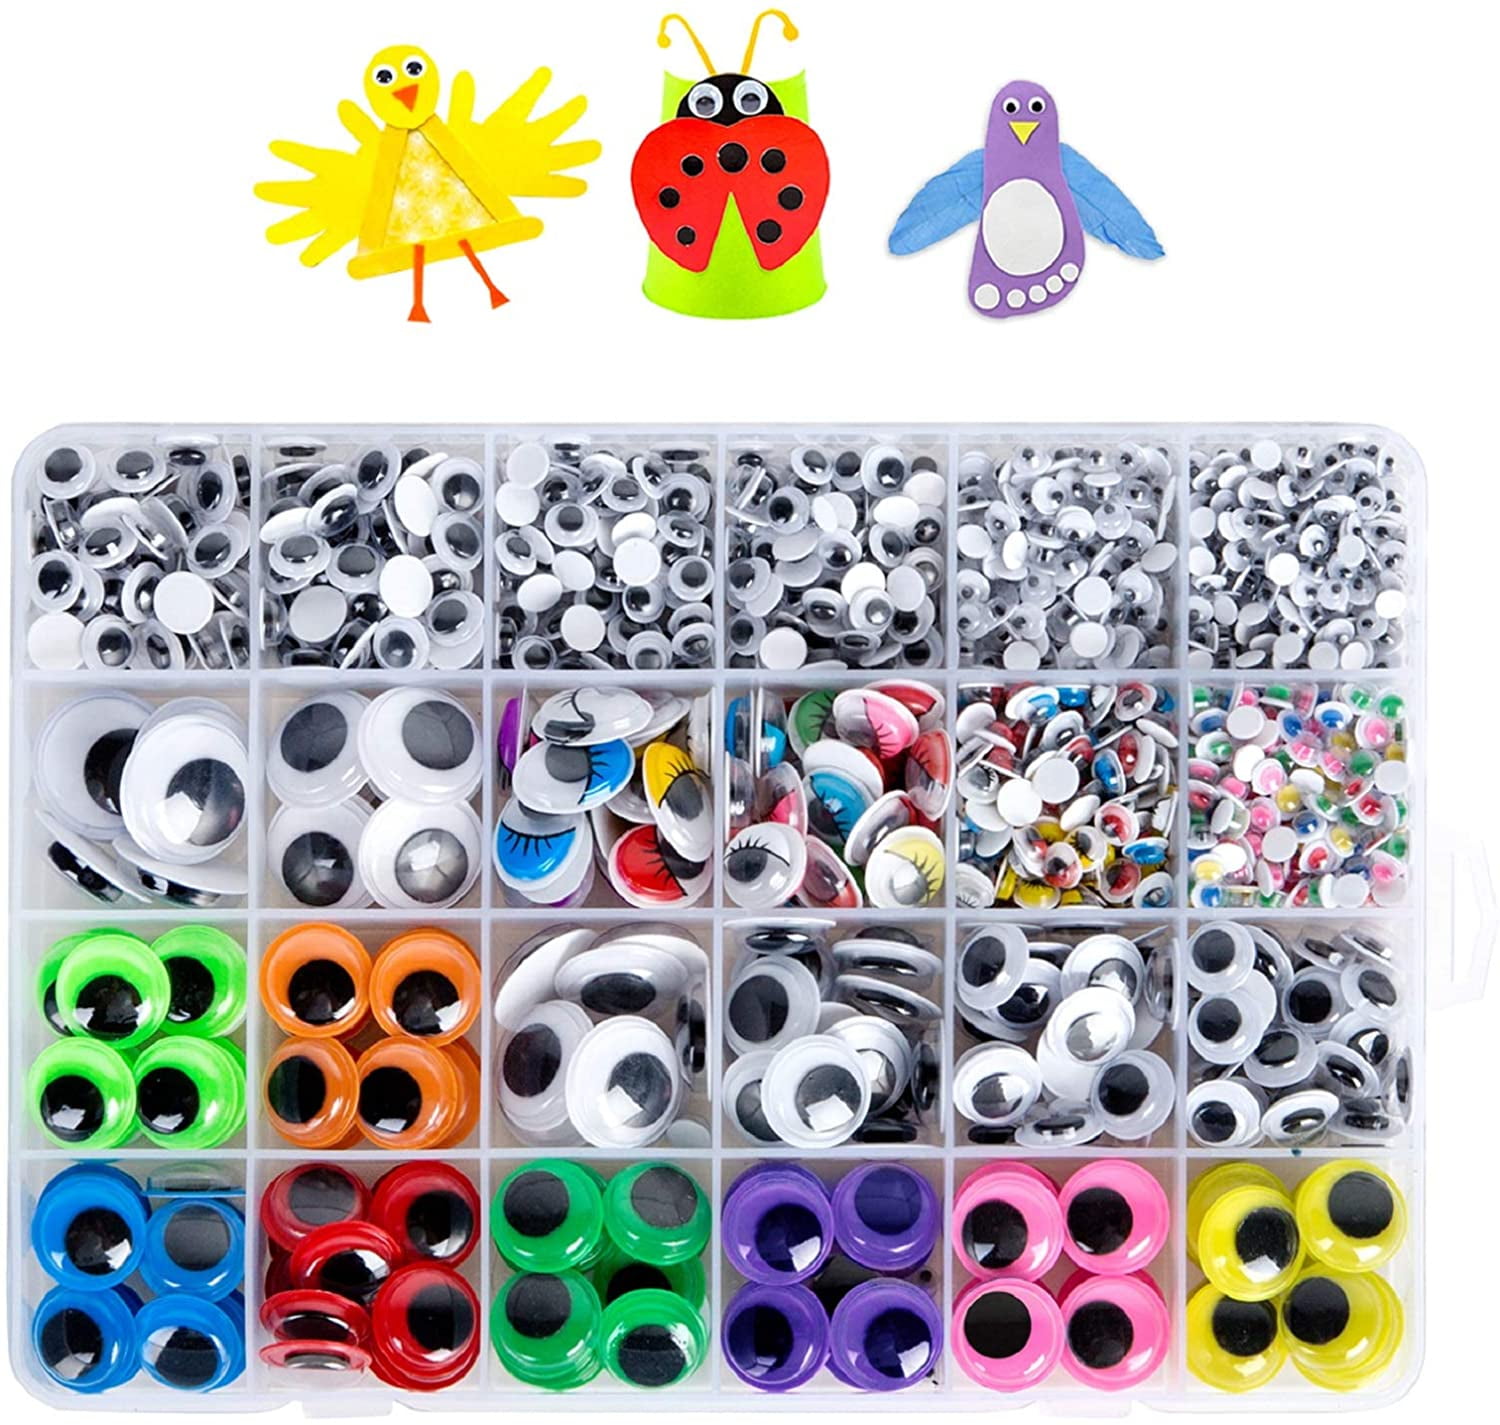 UPINS Wiggle Googly Eyes Self Adhesive Glow in The Dark Luminous 300Pcs  Craft Sticker Sparkle Colored Googly Eyes for DIY Decora